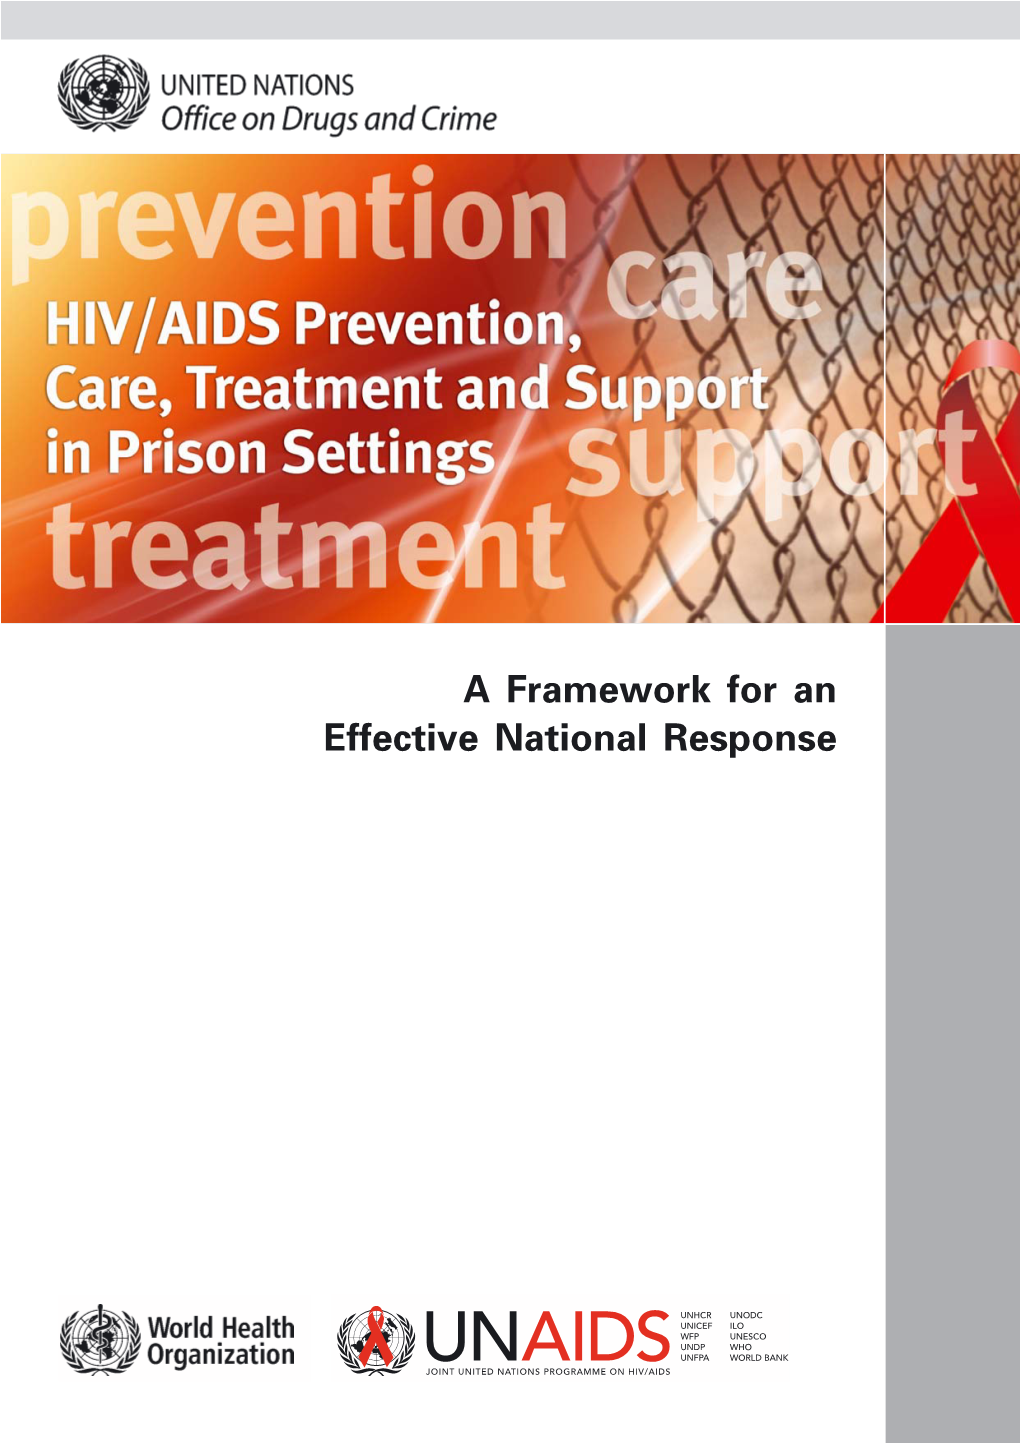 HIV/AIDS Prevention, Care, Treatment and Support in Prison Settings